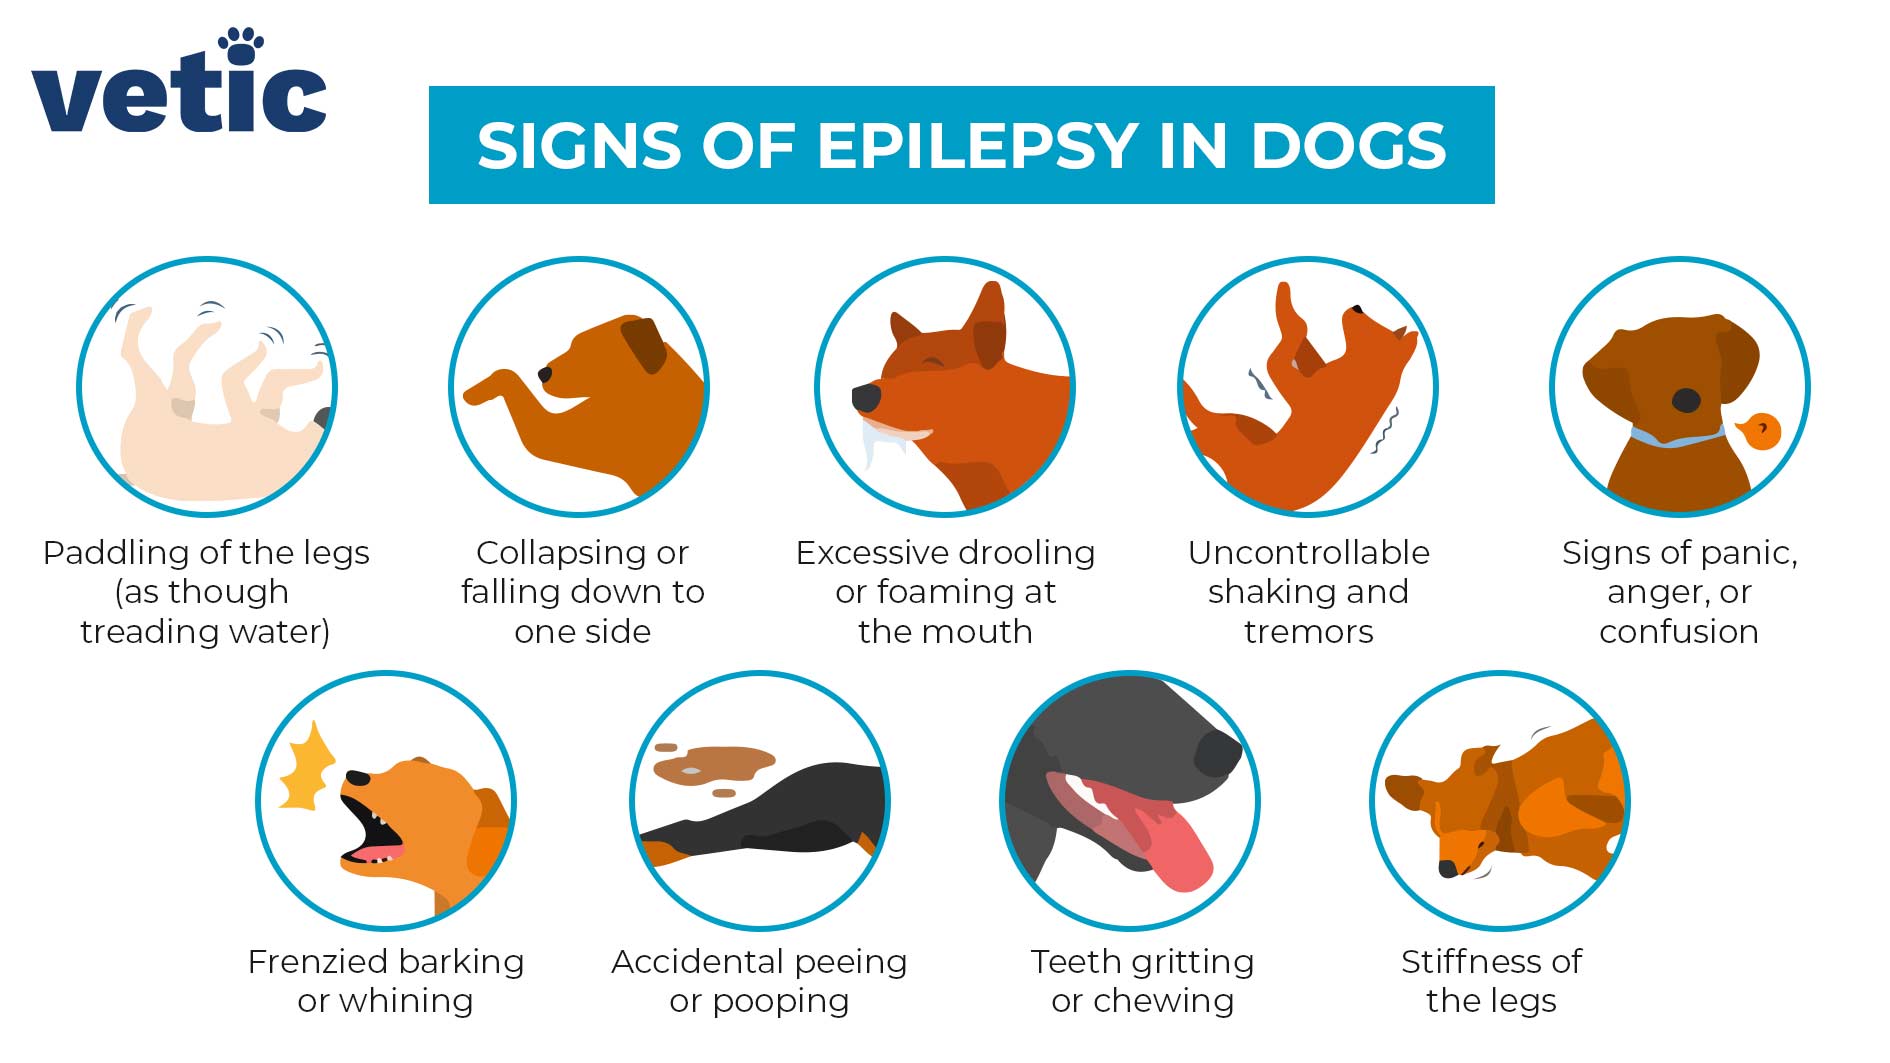 the signs of epilepsy in dogs. the signs include paddling of the legs, collapsing (Falling down), excessive drooling, tremors, panic or aggression, frenzied barking, accidental peeing or pooping, teeth gritting and stiffness of the legs.